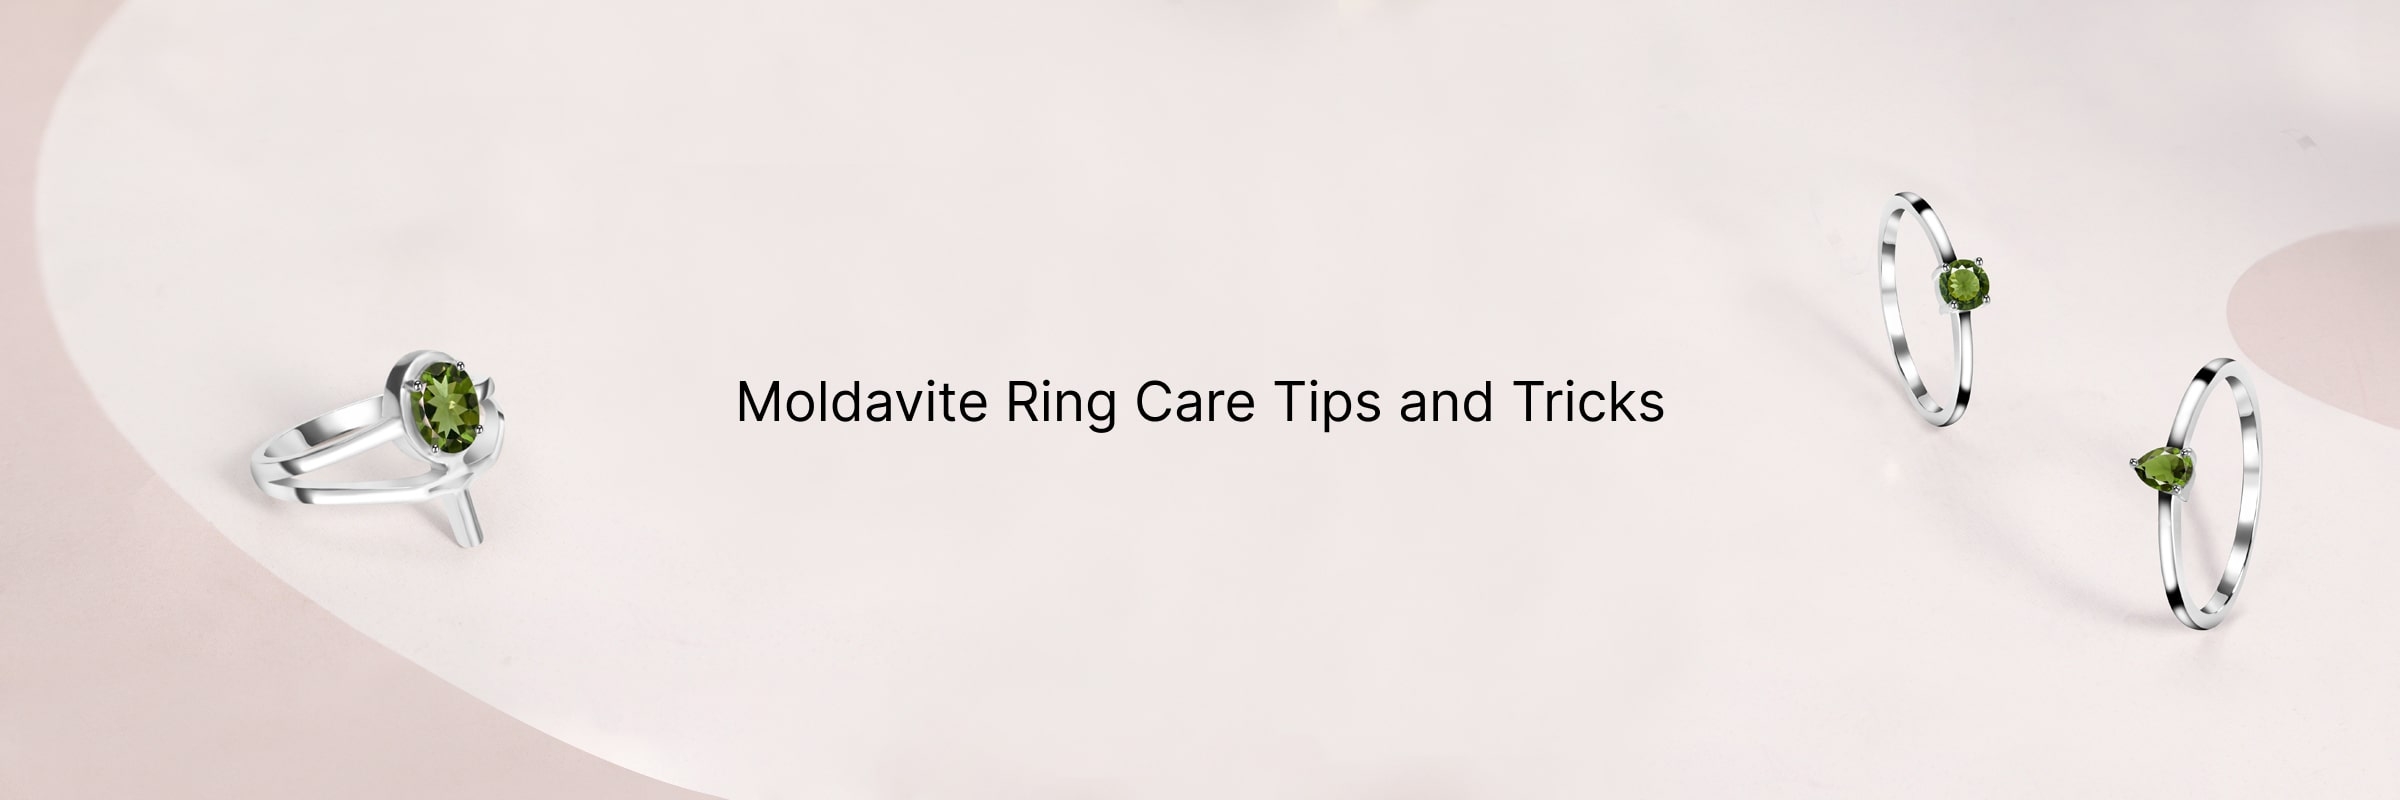 Cleaning, Care, and Maintenance of Your Moldavite Ring